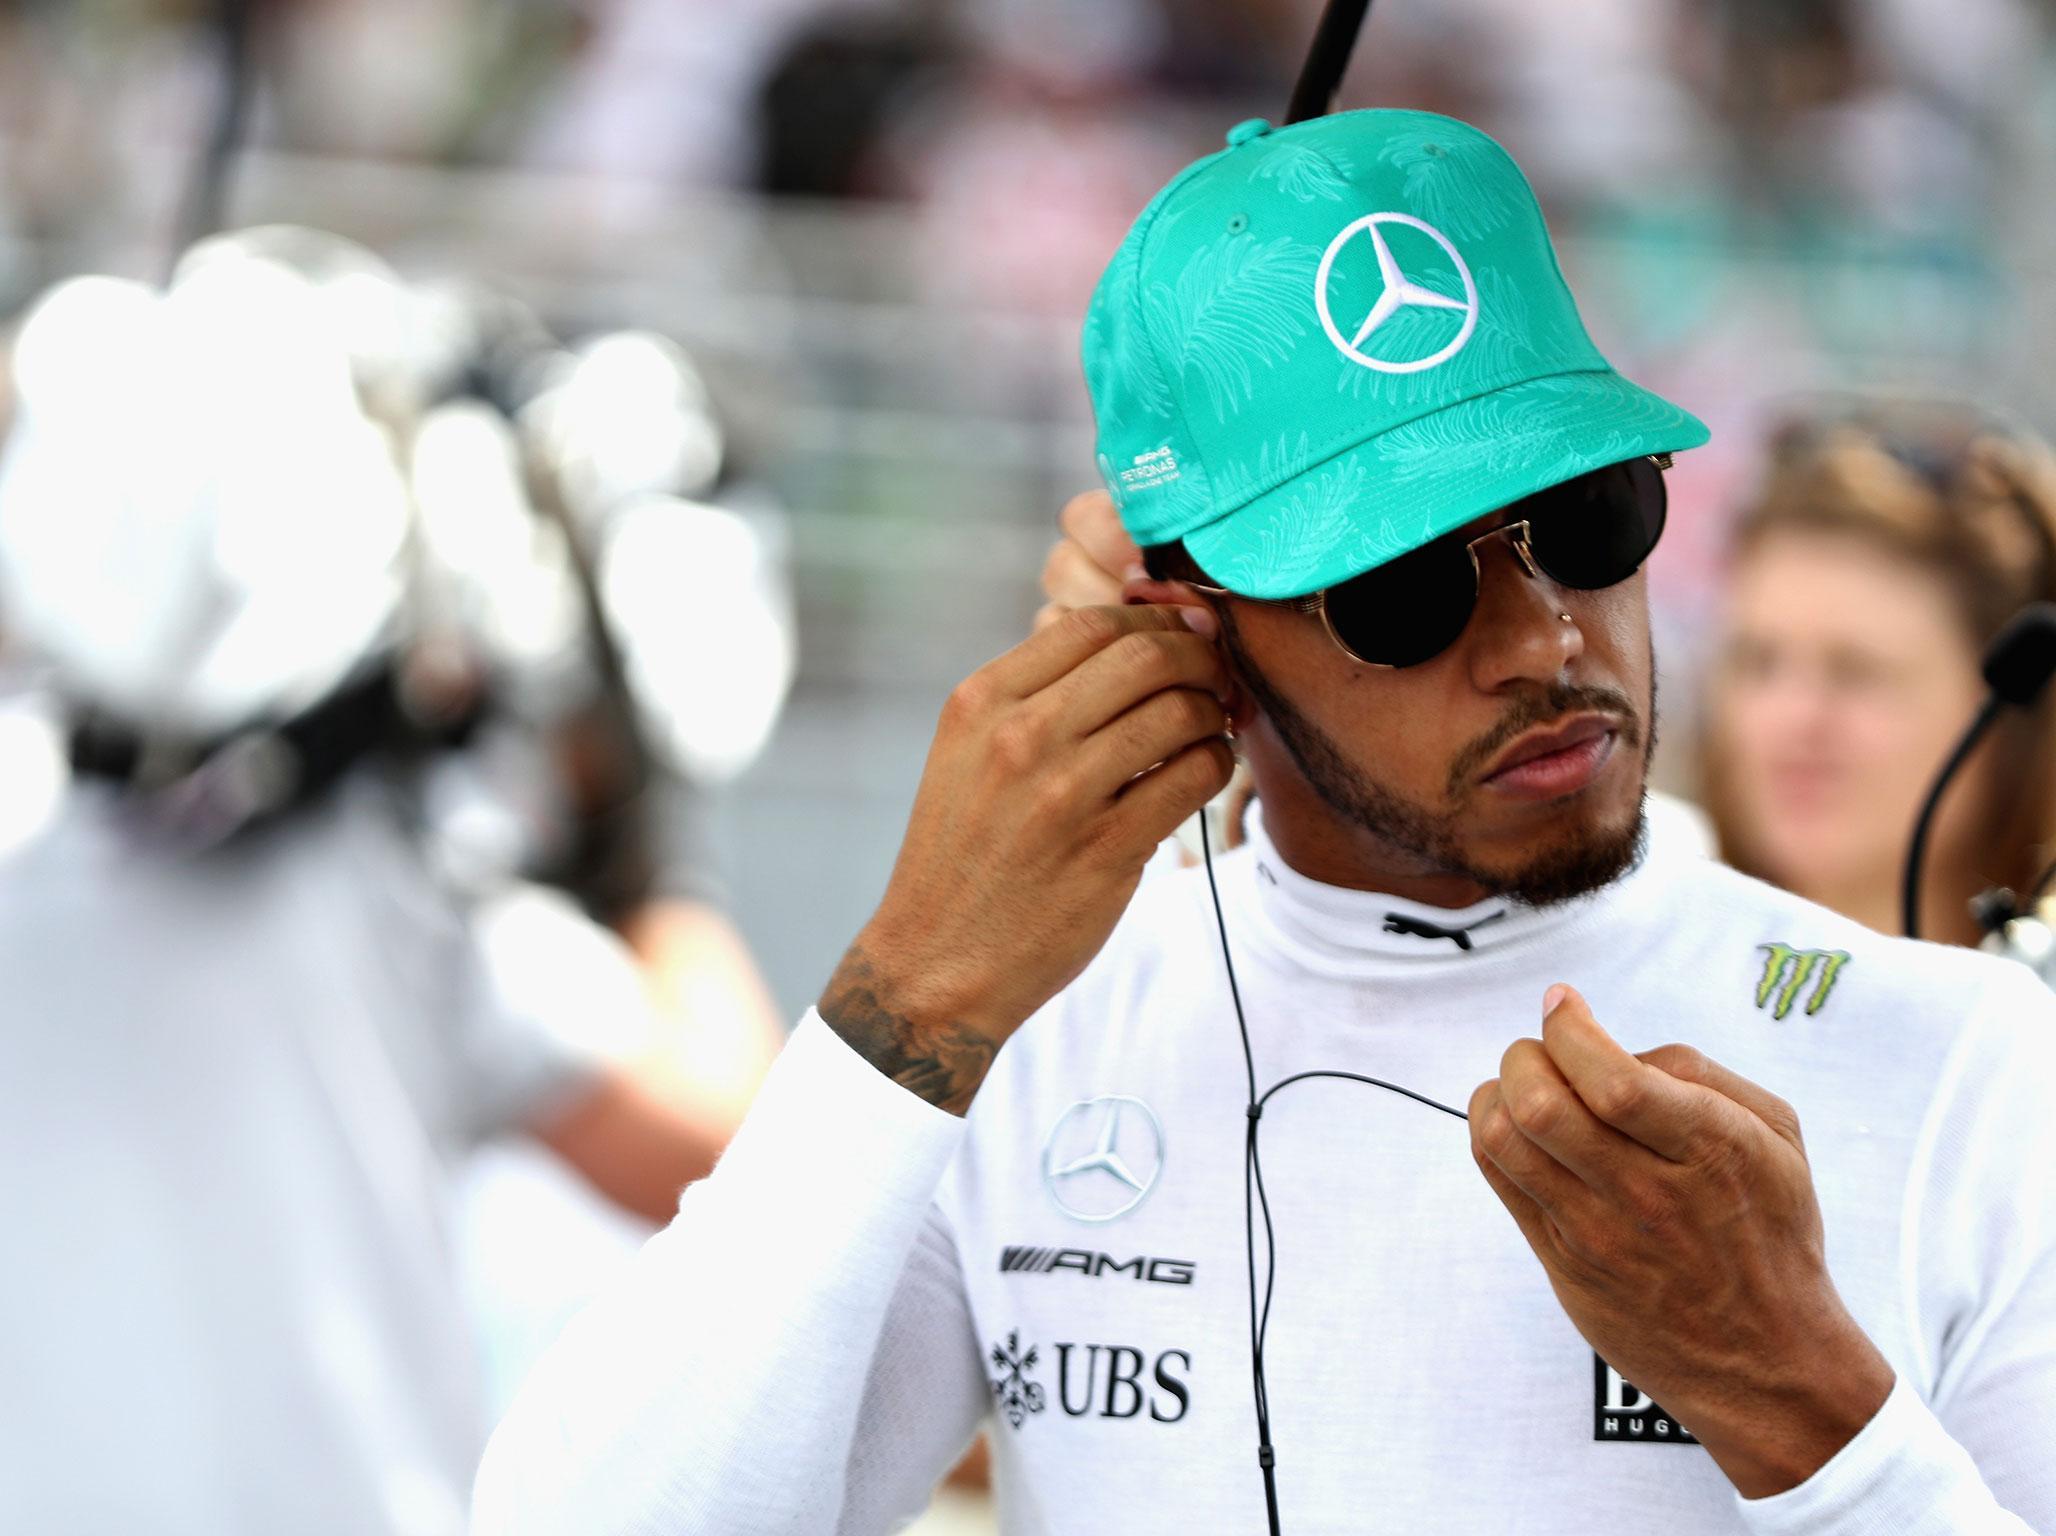 Lewis Hamilton extended his advantage on Sunday but the race for the title is anything but over